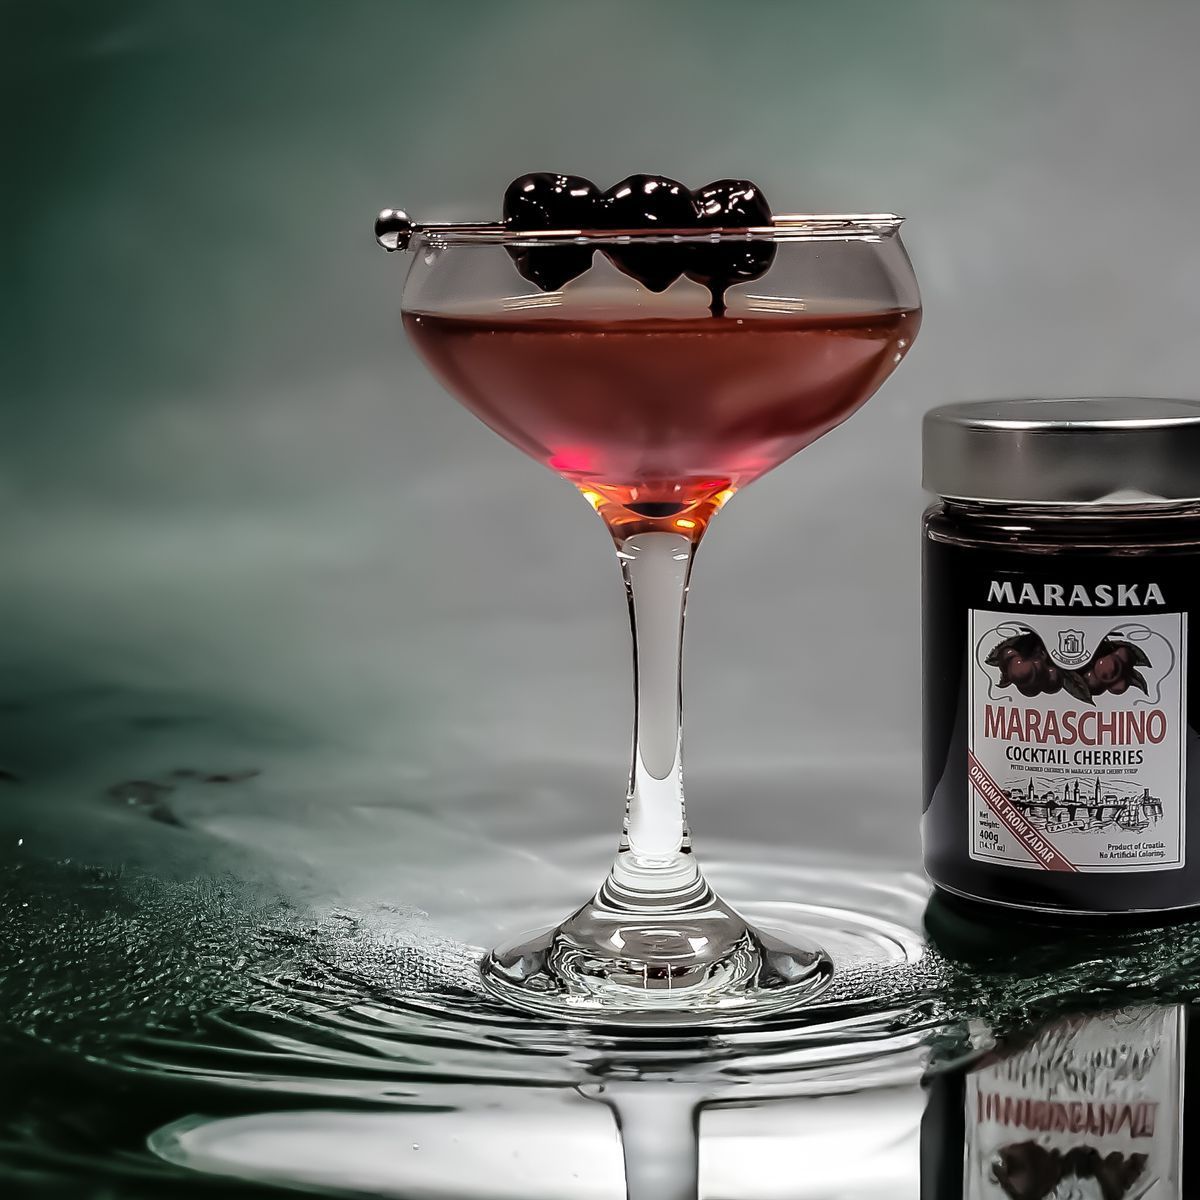 
We wanted to create a more Cherry forward Manhattan, the San Joaquin does just that. 

This cocktail showcases the Maraska Cherry and incorporates an amaro that we truly love. The balance is an absolute delight. 

Thank you, @Maraska_zadar for the maraska maraschino cherries. We really had fun with this. 